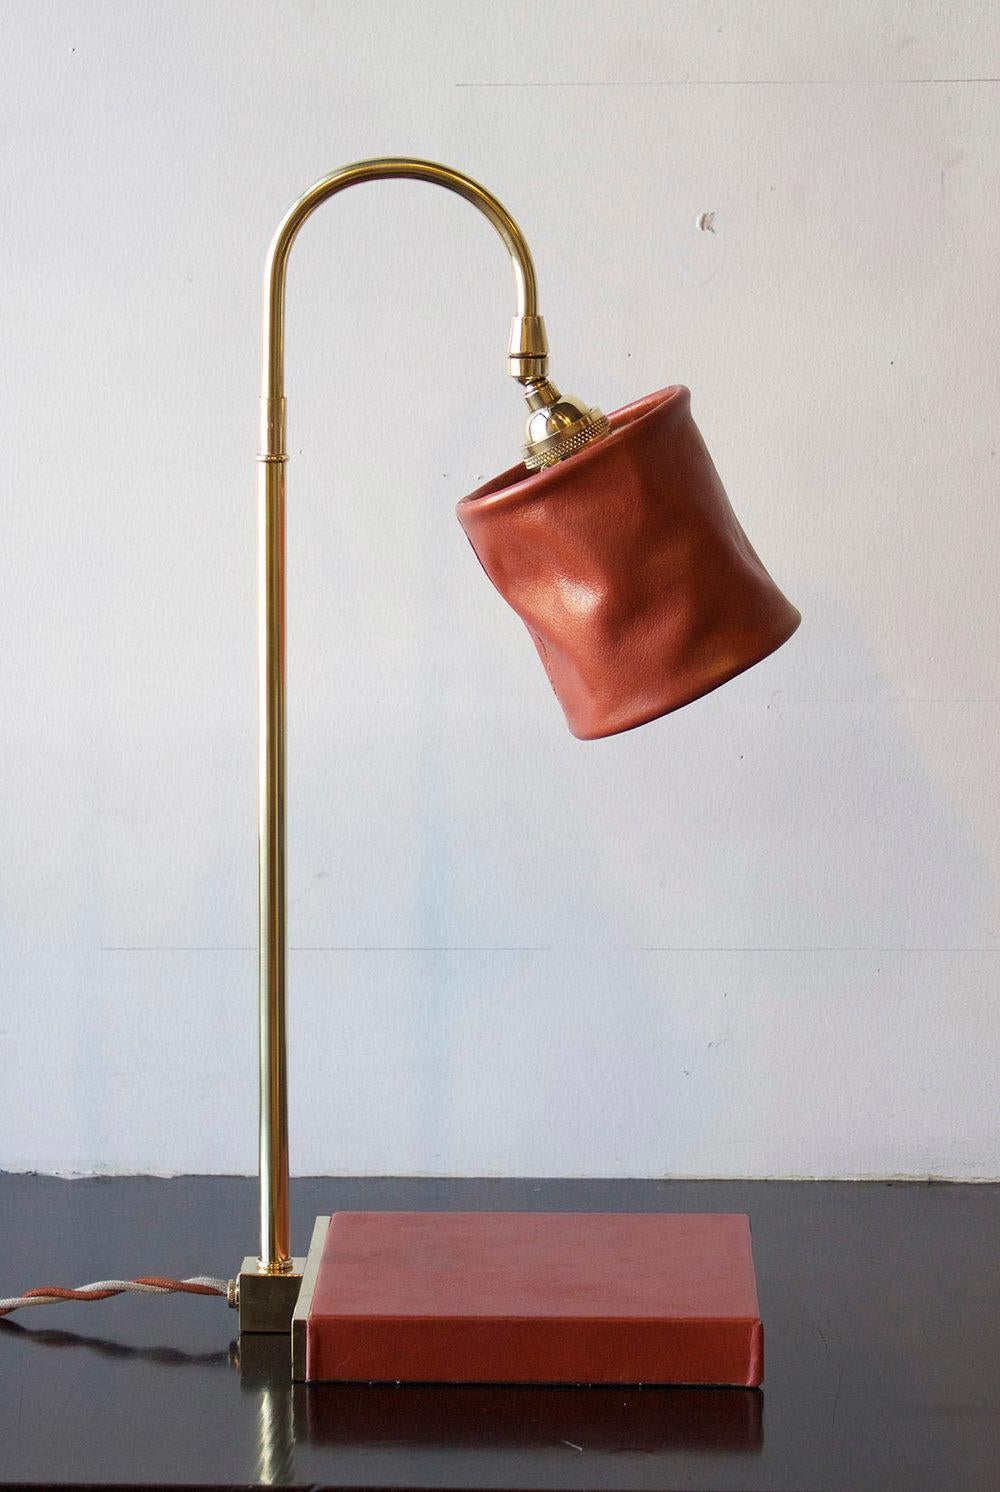 Series01 Desk Lamp, Hand-Dyed Blush 'Pink' Leather, Polished Nickel-Plated Brass For Sale 2